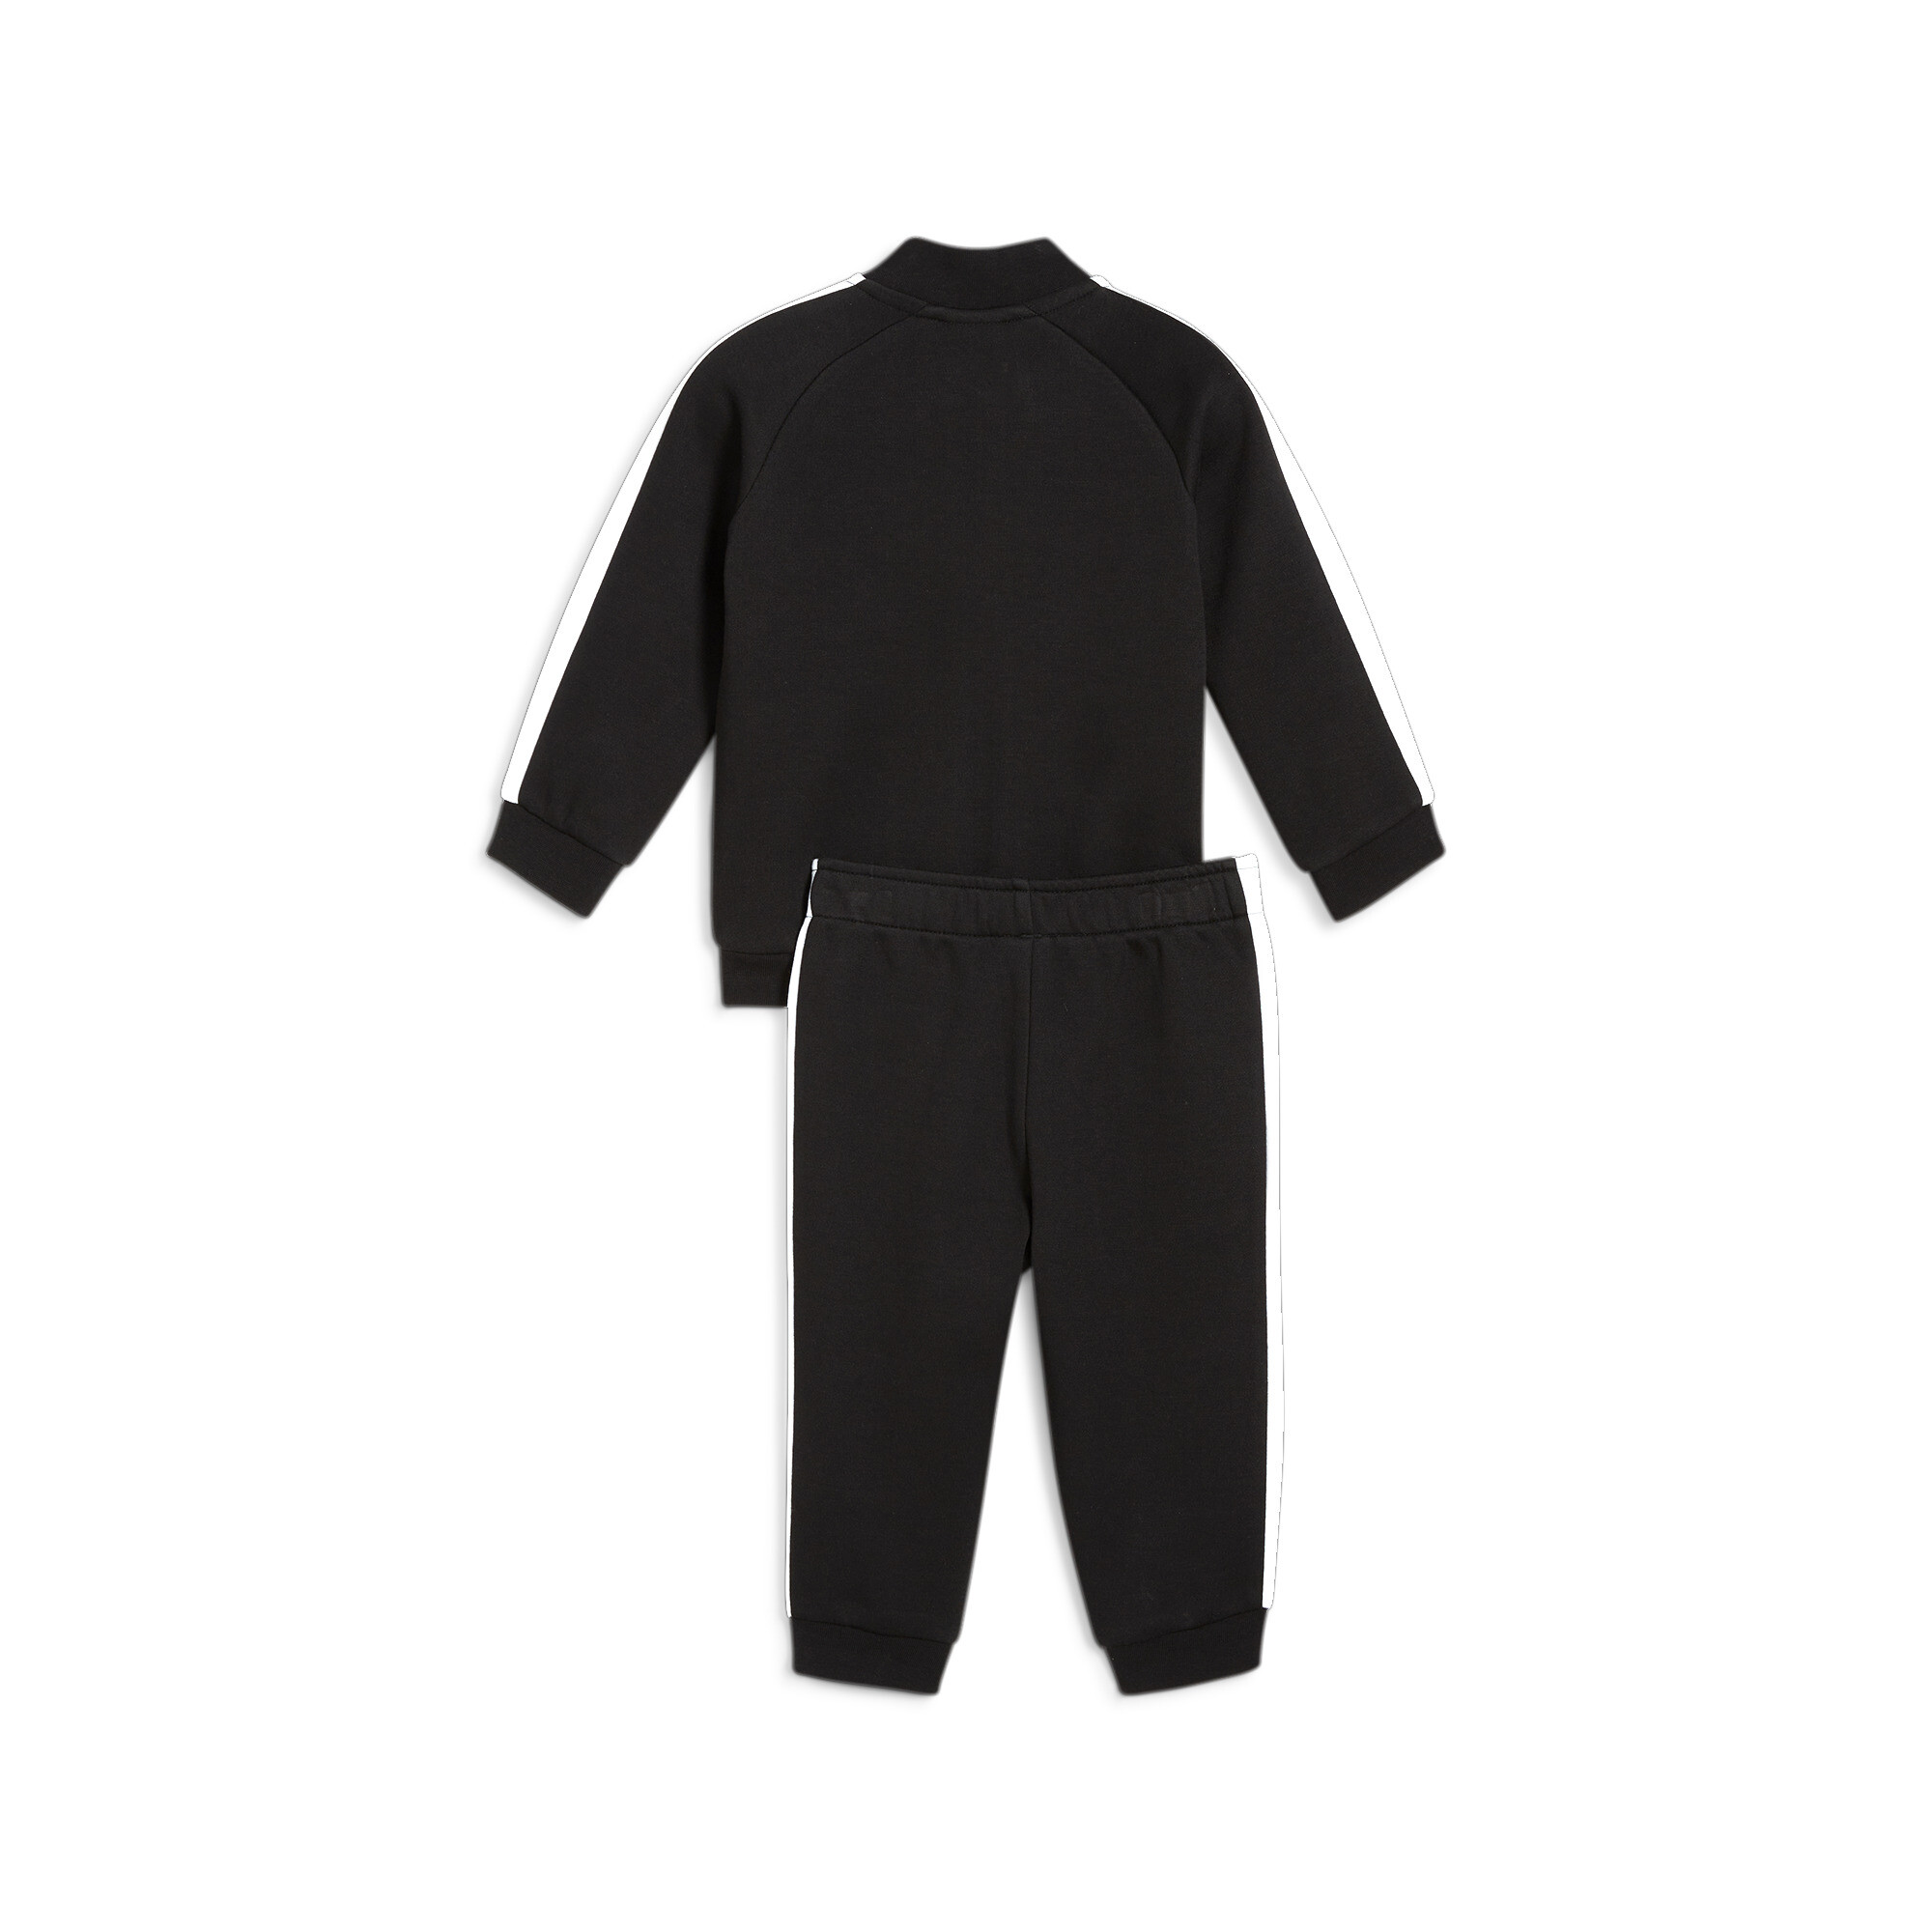 Kids' PUMA MINICATS T7 ICONIC Baby Tracksuit Set In 10 - Black, Size 12-18 Months